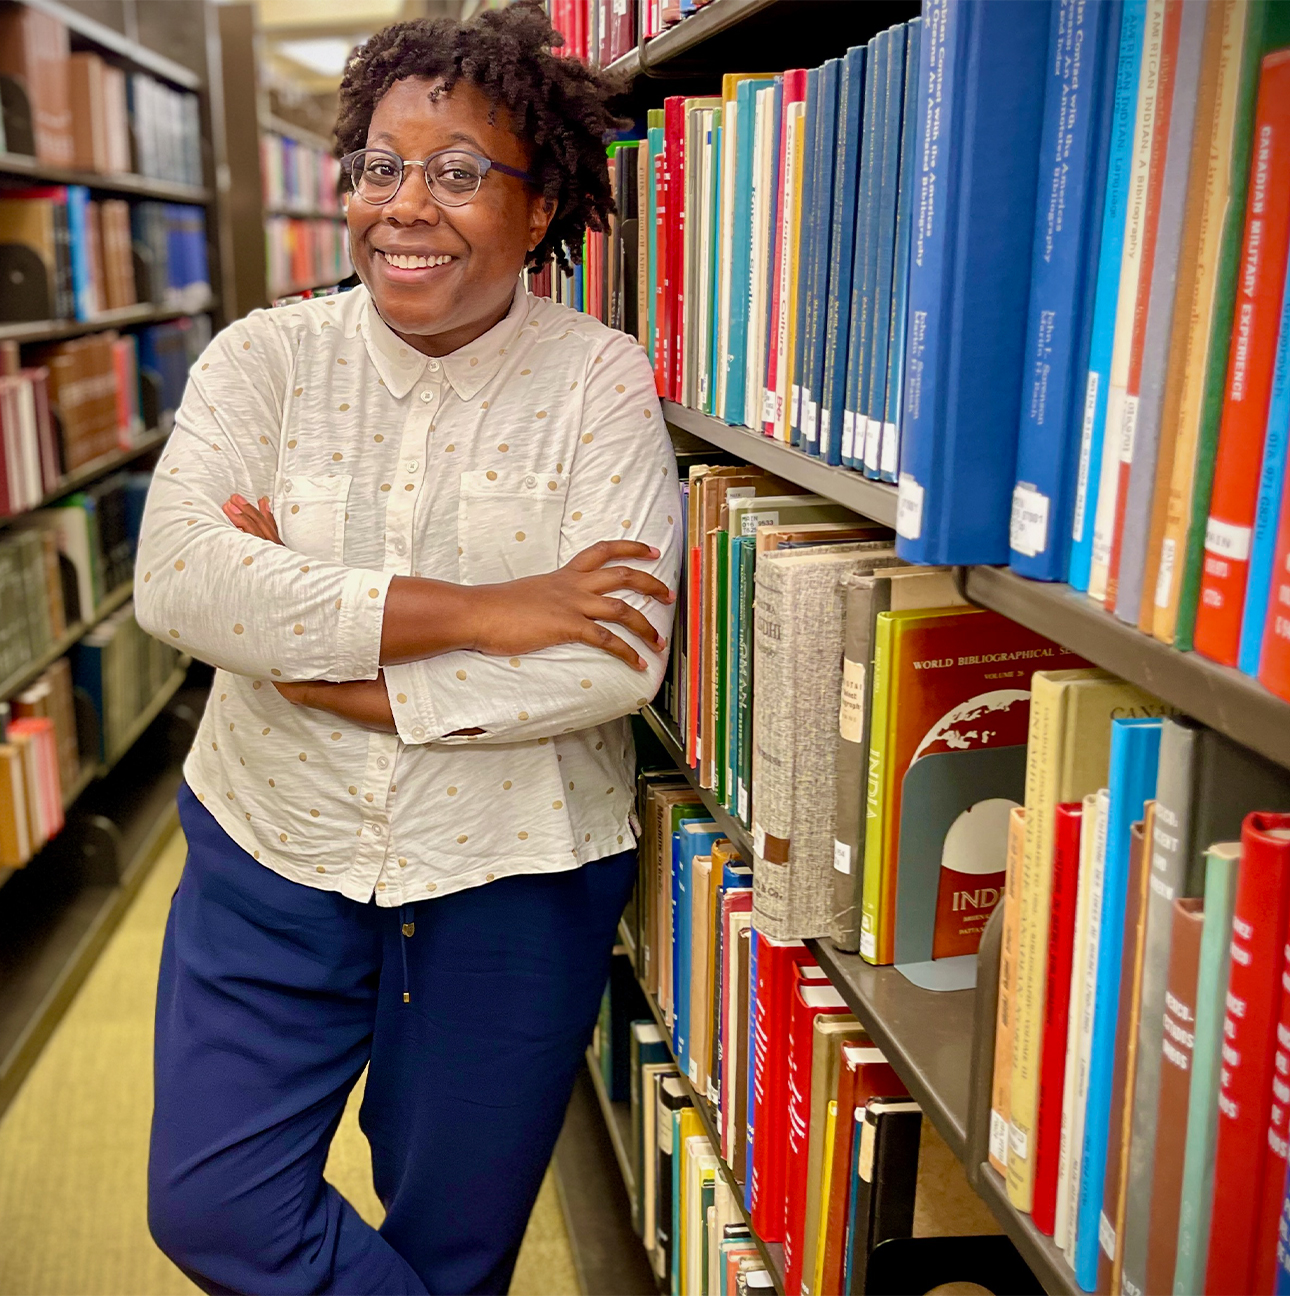 Moya Bailey stands smiling with her arms crossed next to large shelves of books at a library.